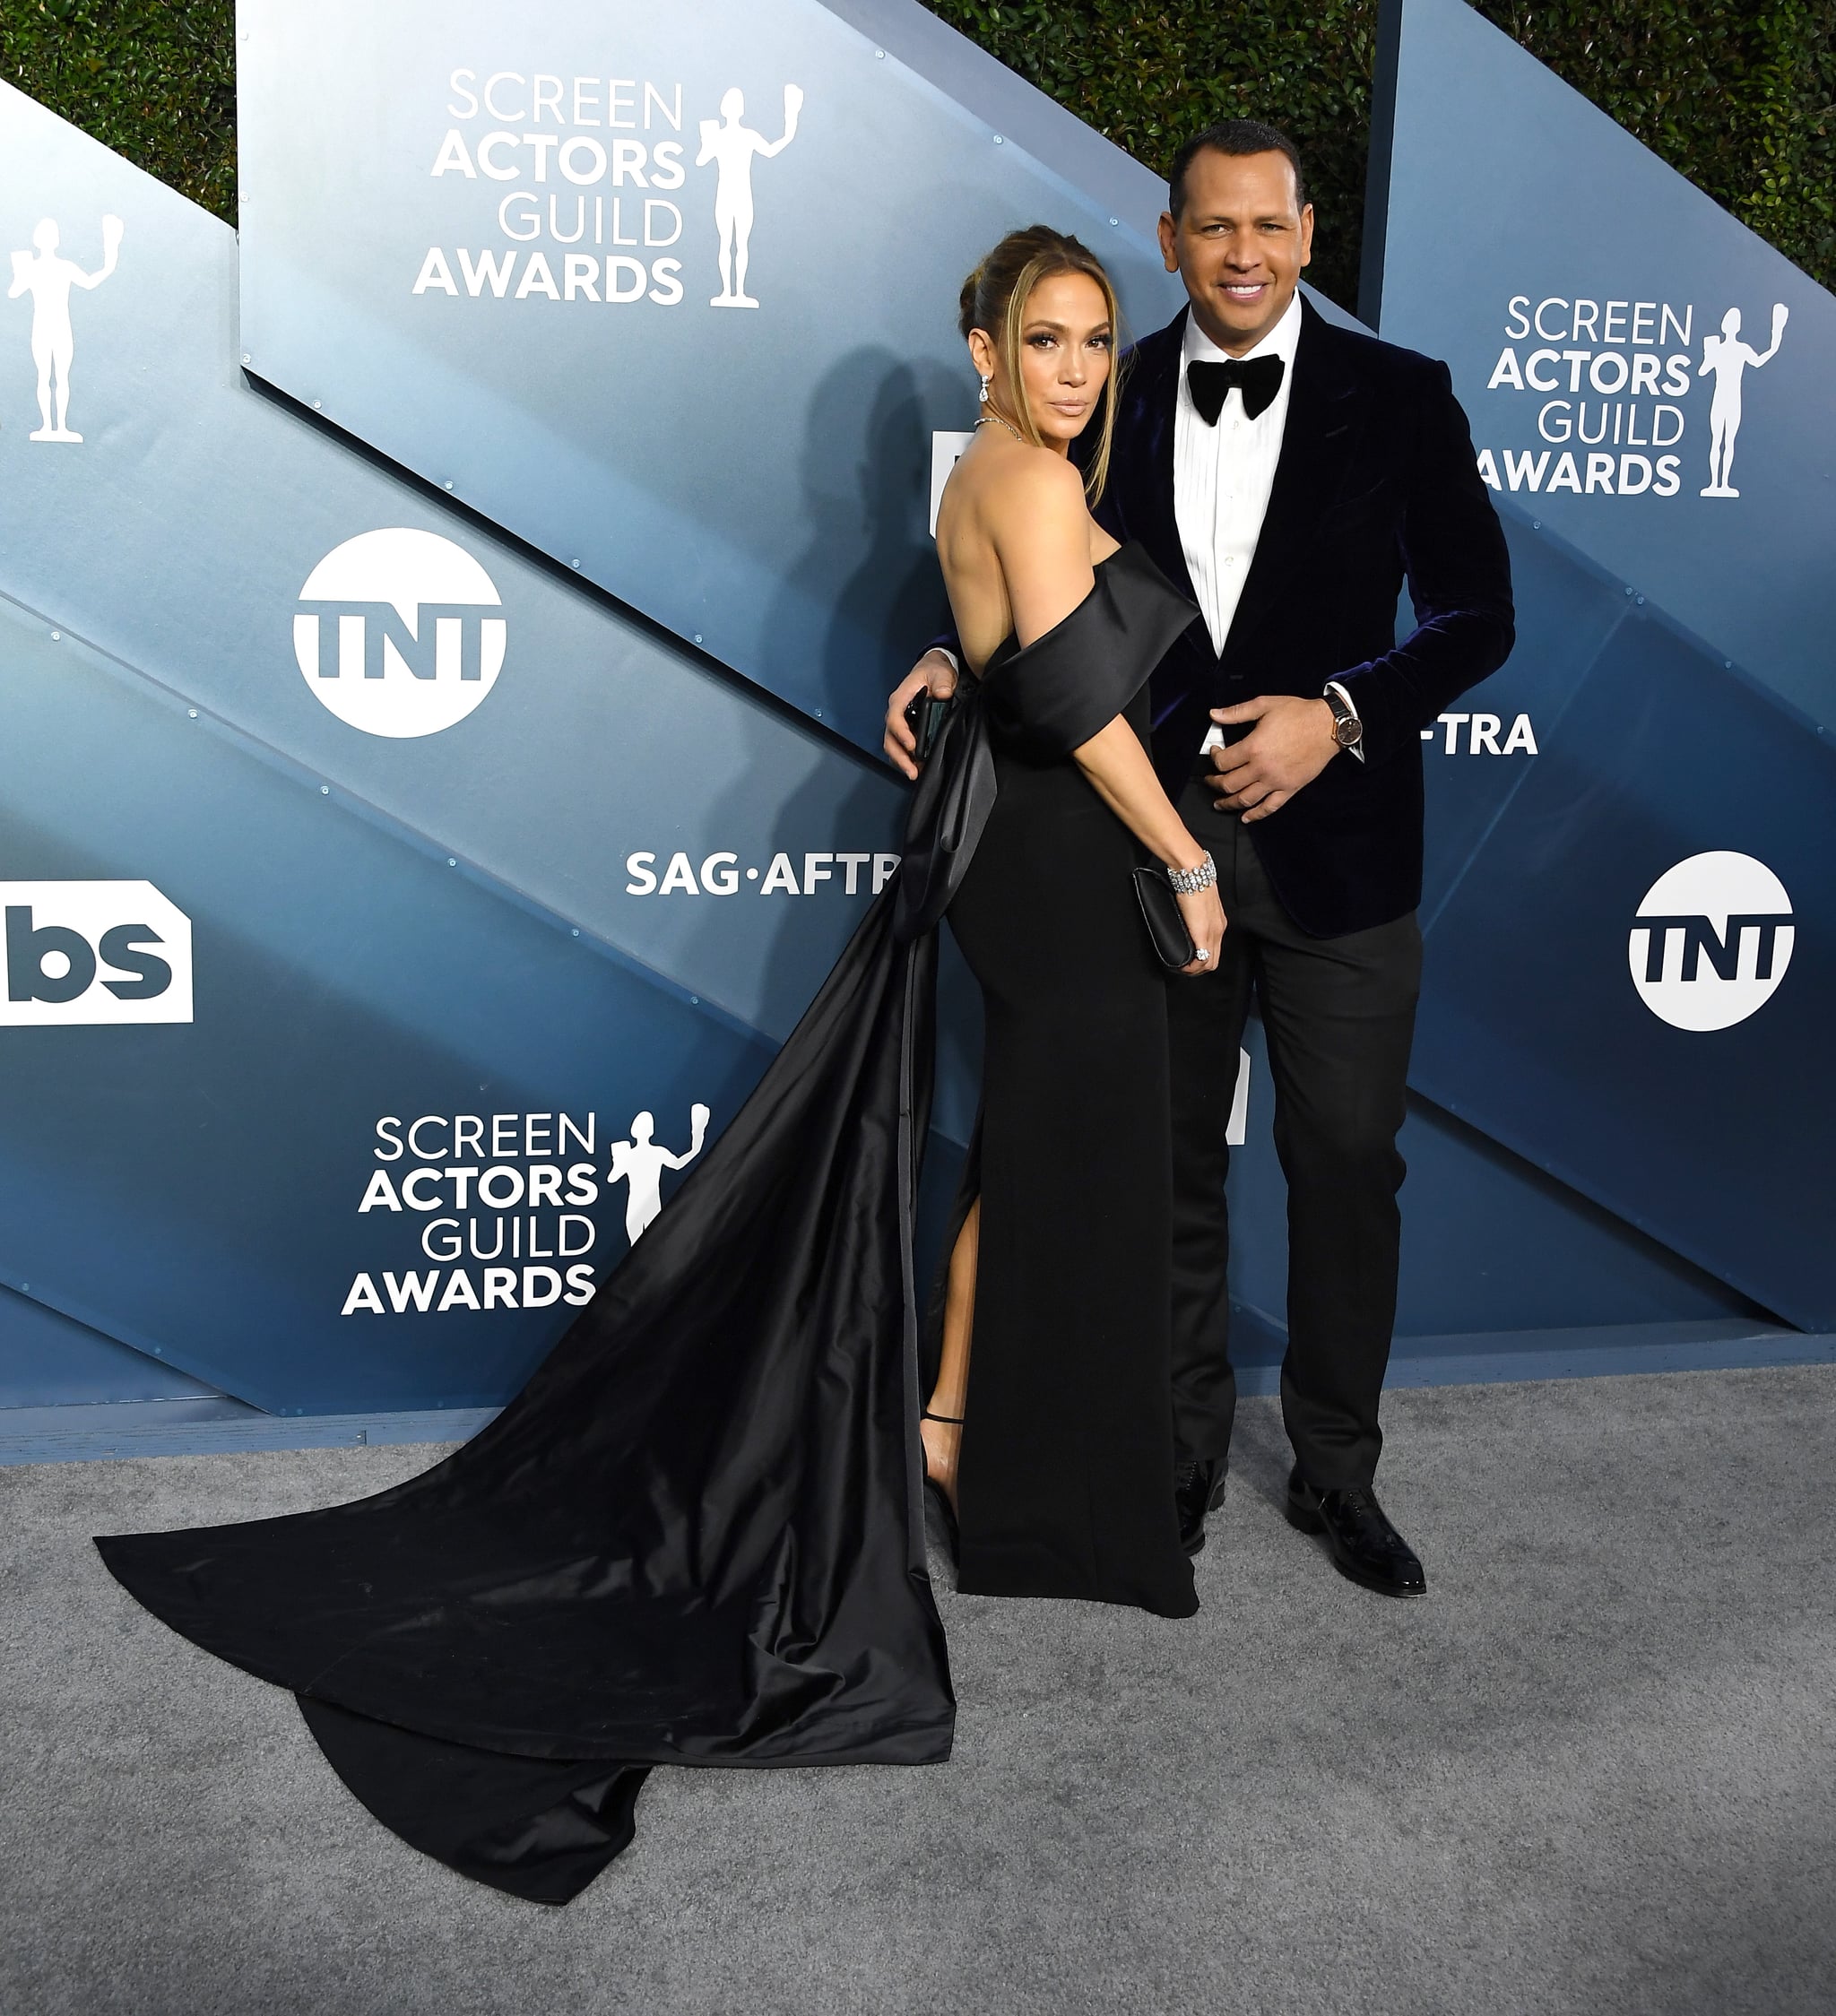 LOS ANGELES, CALIFORNIA - JANUARY 19: Jennifer Lopez and Alex Rodriguez arrives at the 26th Annual Screen Actors Guild Awards at The Shrine Auditorium on January 19, 2020 in Los Angeles, California. (Photo by Steve Granitz/WireImage)